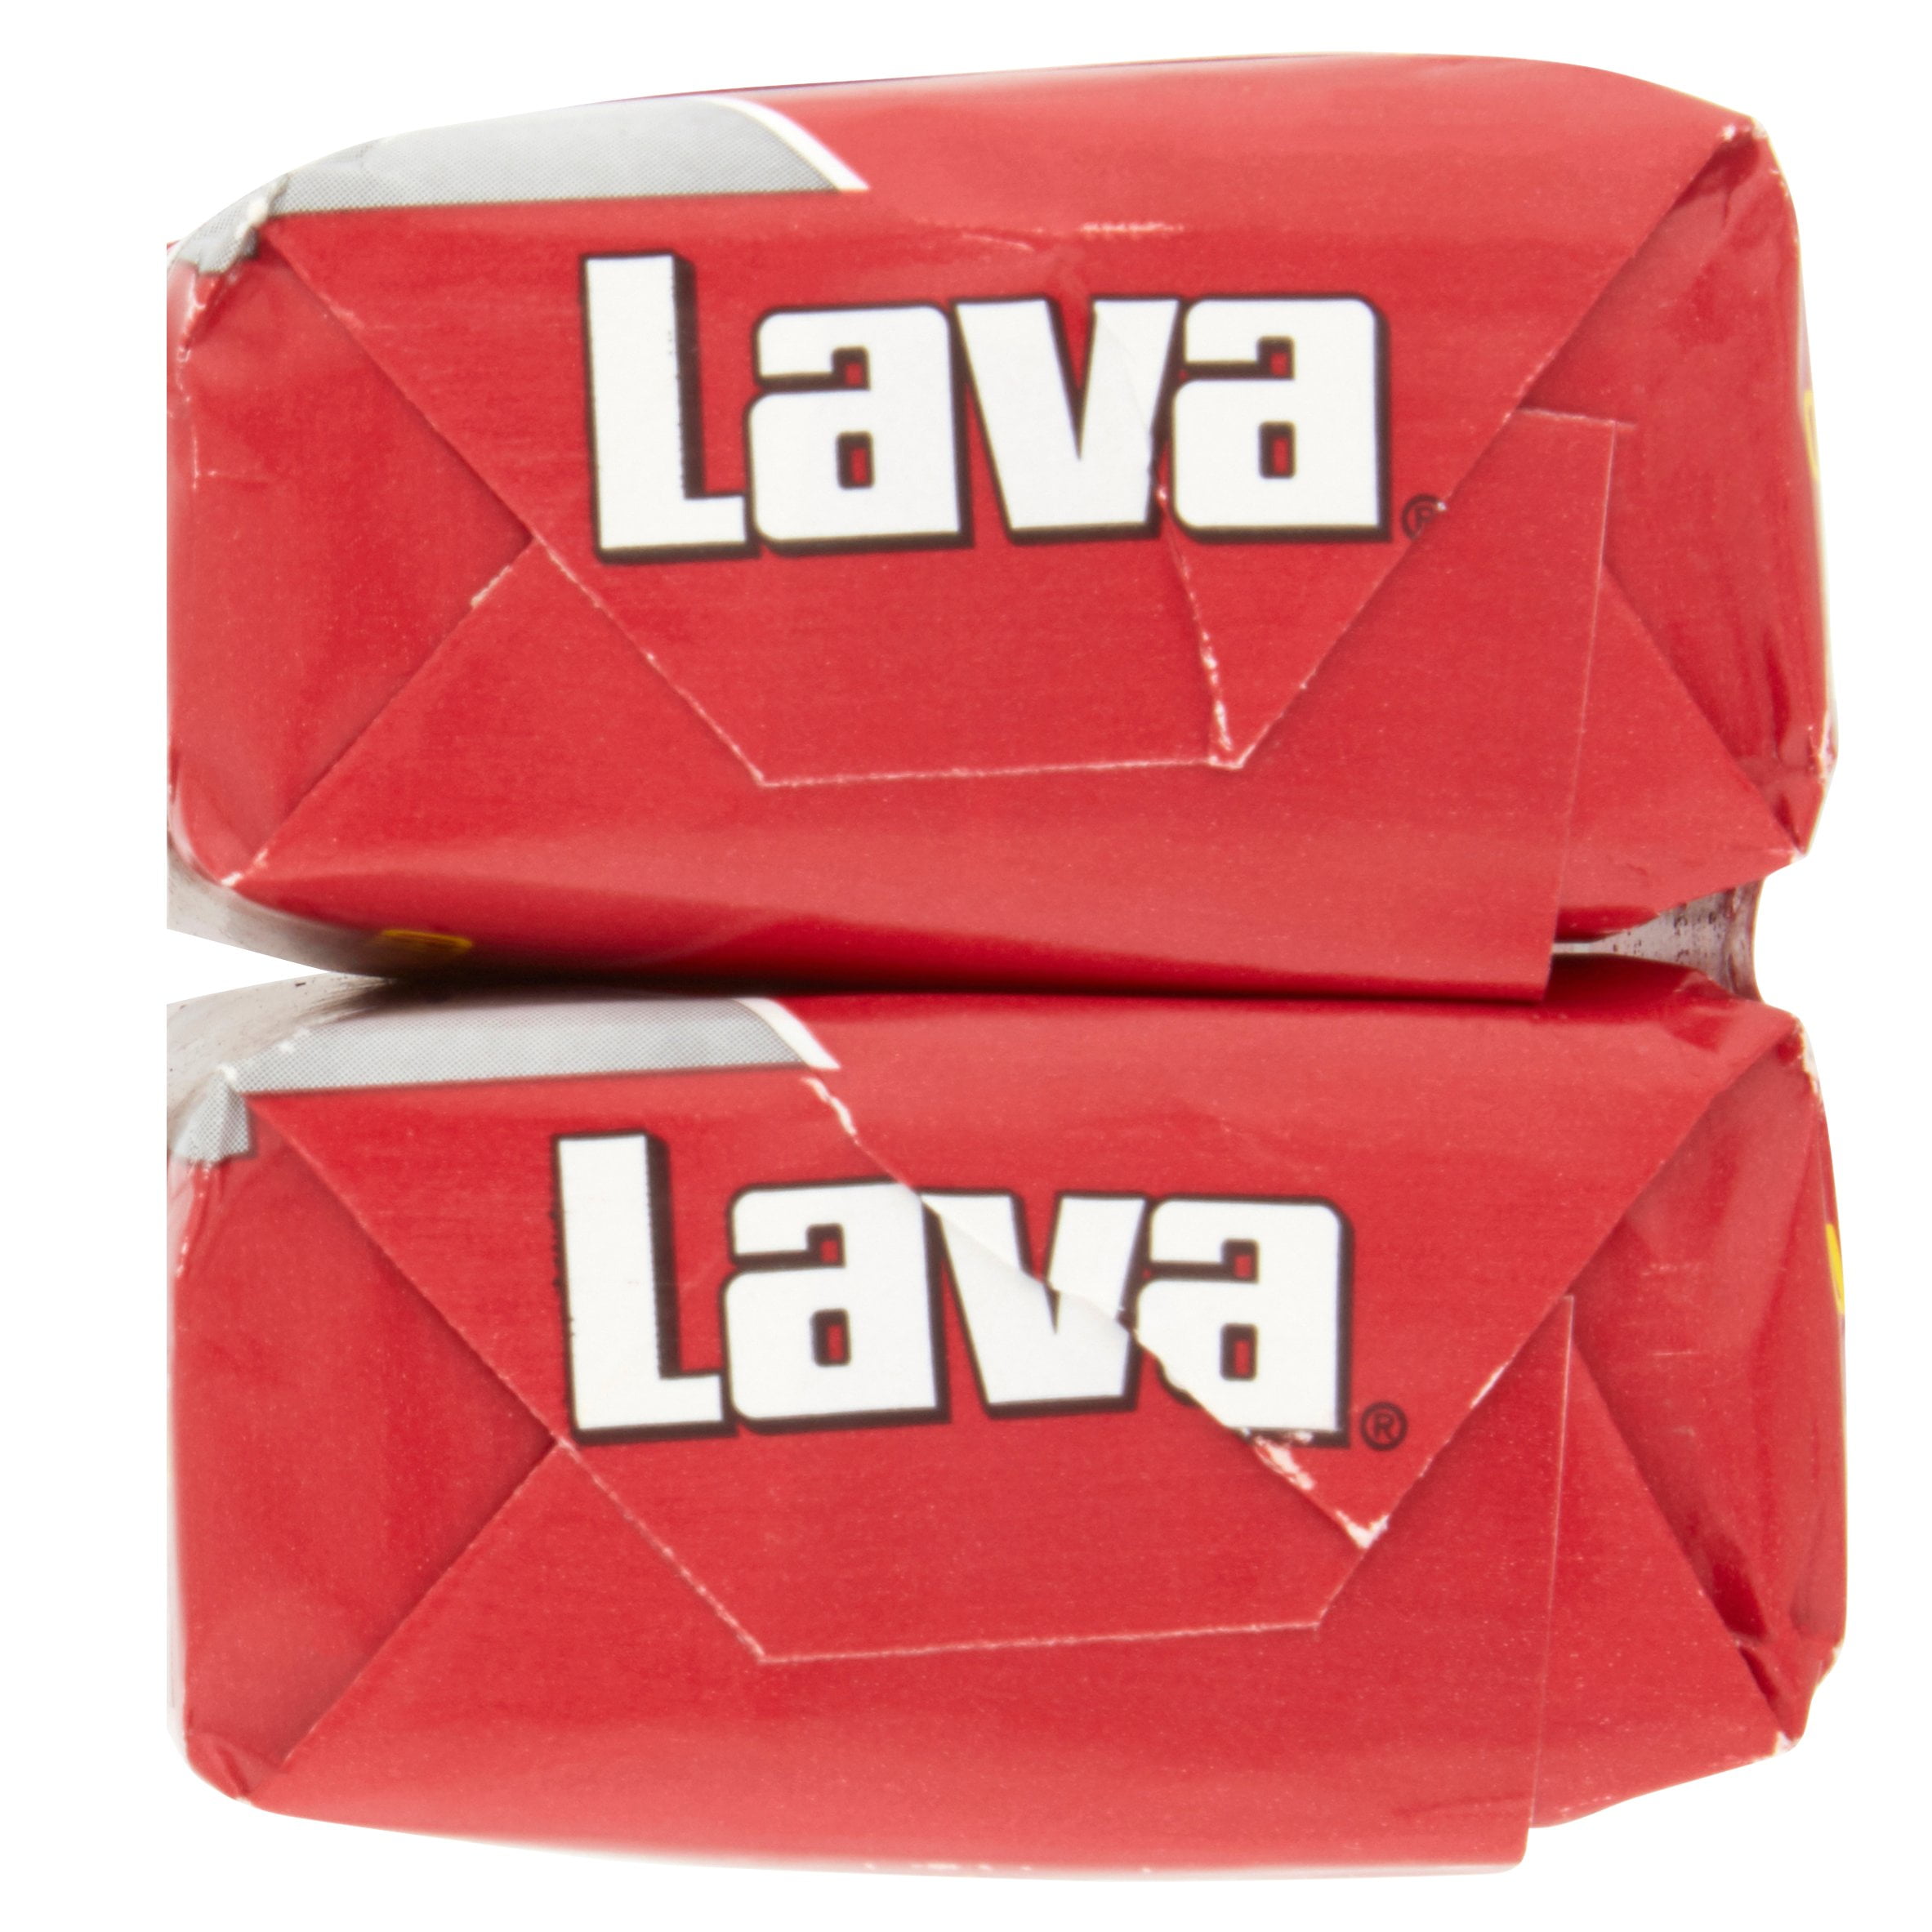 Lava Bar 10186 5.75 oz. Pumice-Powered Two-Pack Hand Soap with Moisturizers  - 12/Case